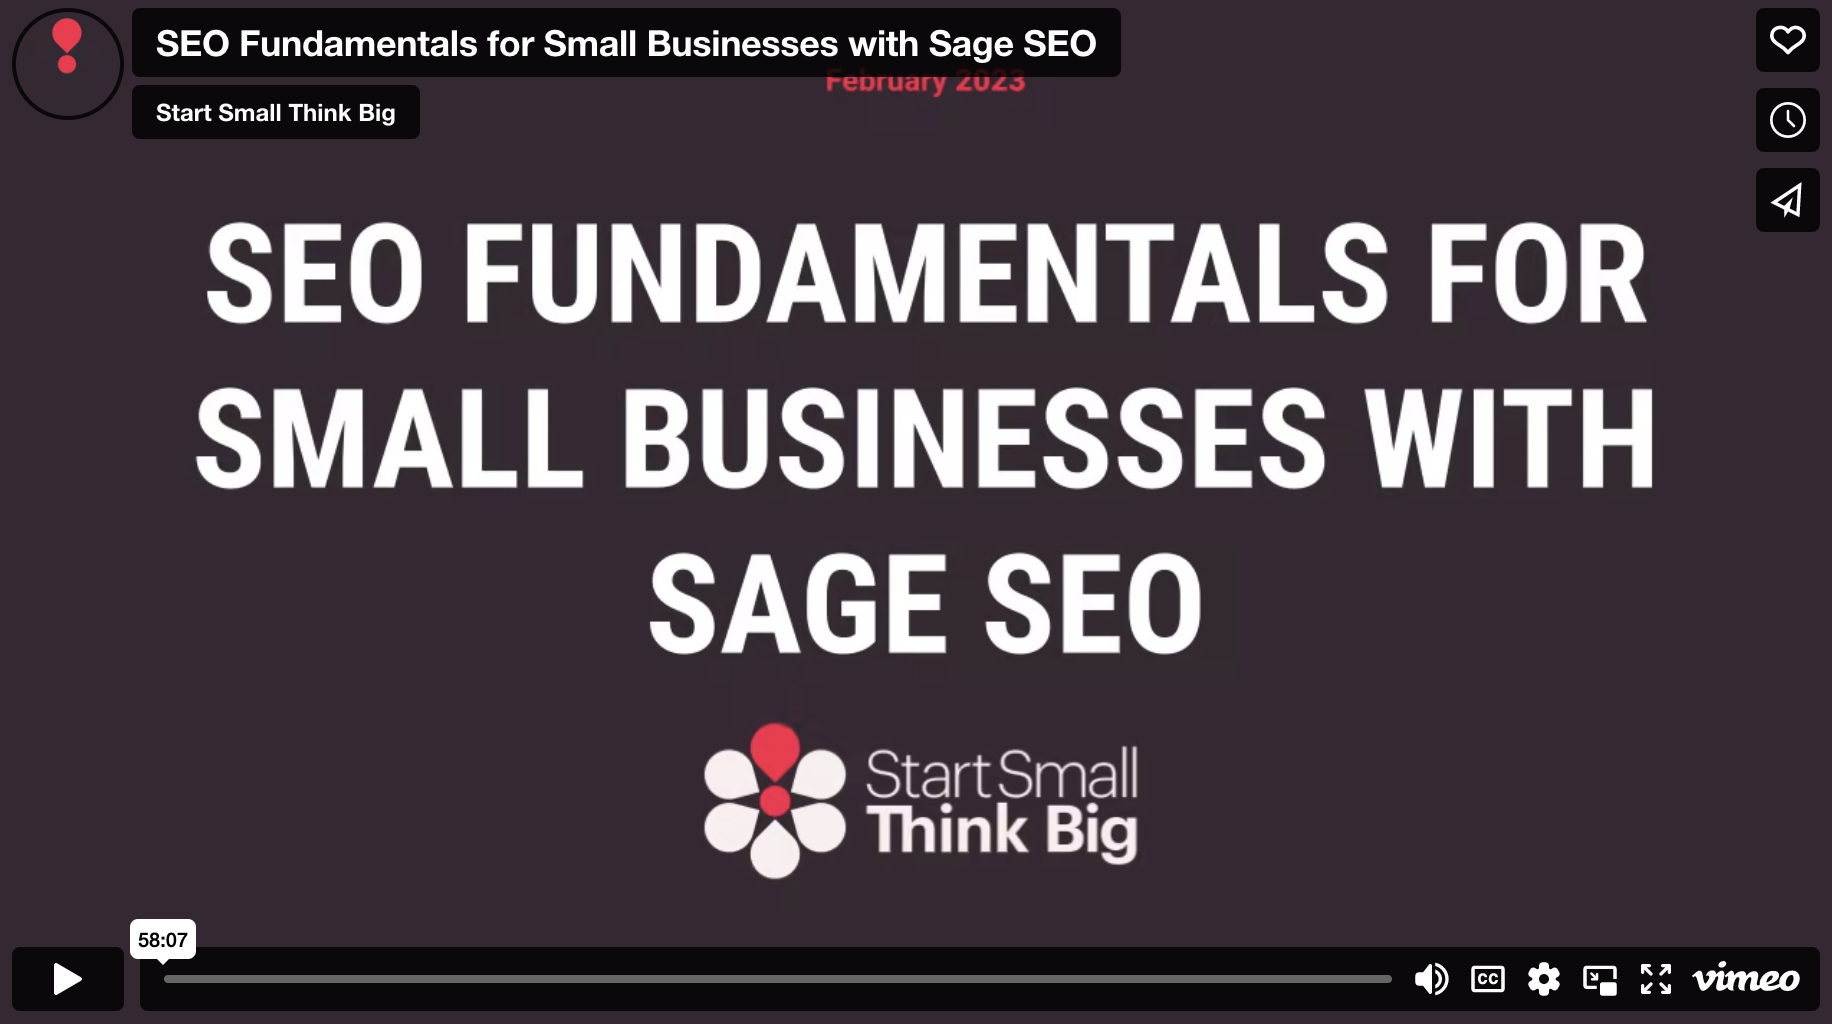 SEO Fundamentals for Small Businesses with Sage SEO